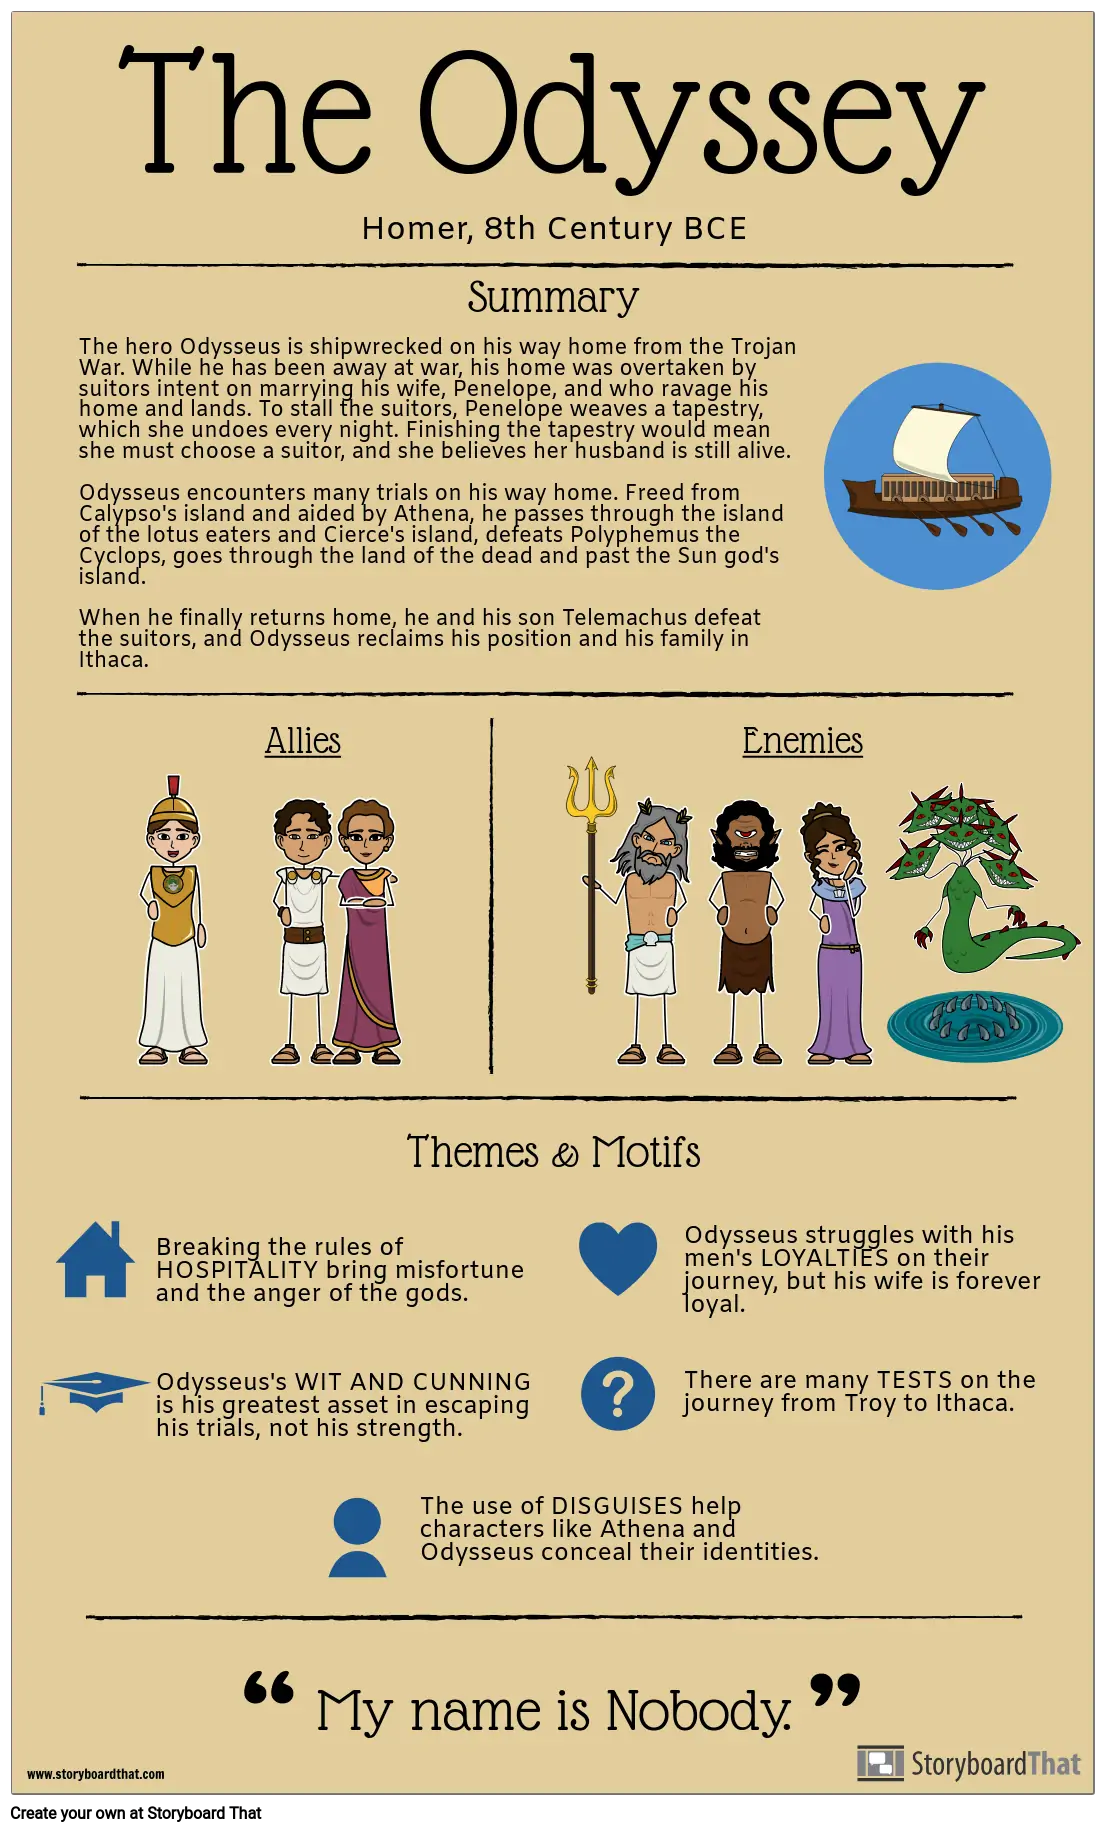 The Odyssey Summary Infographic